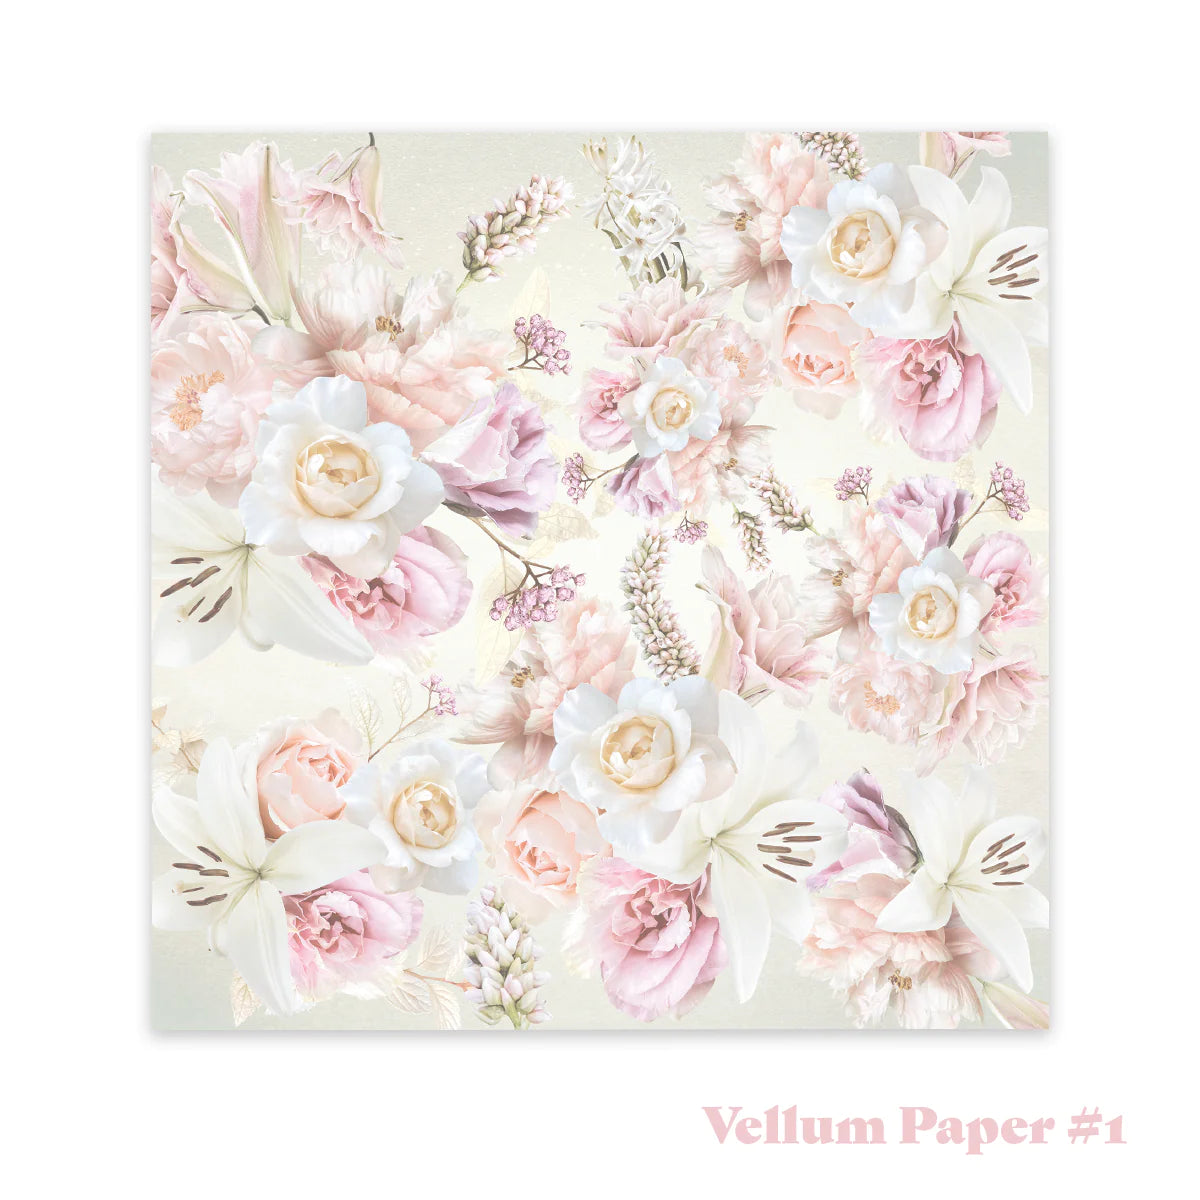 Vintage Tea Collection - 8in x 8in Vellum Paper